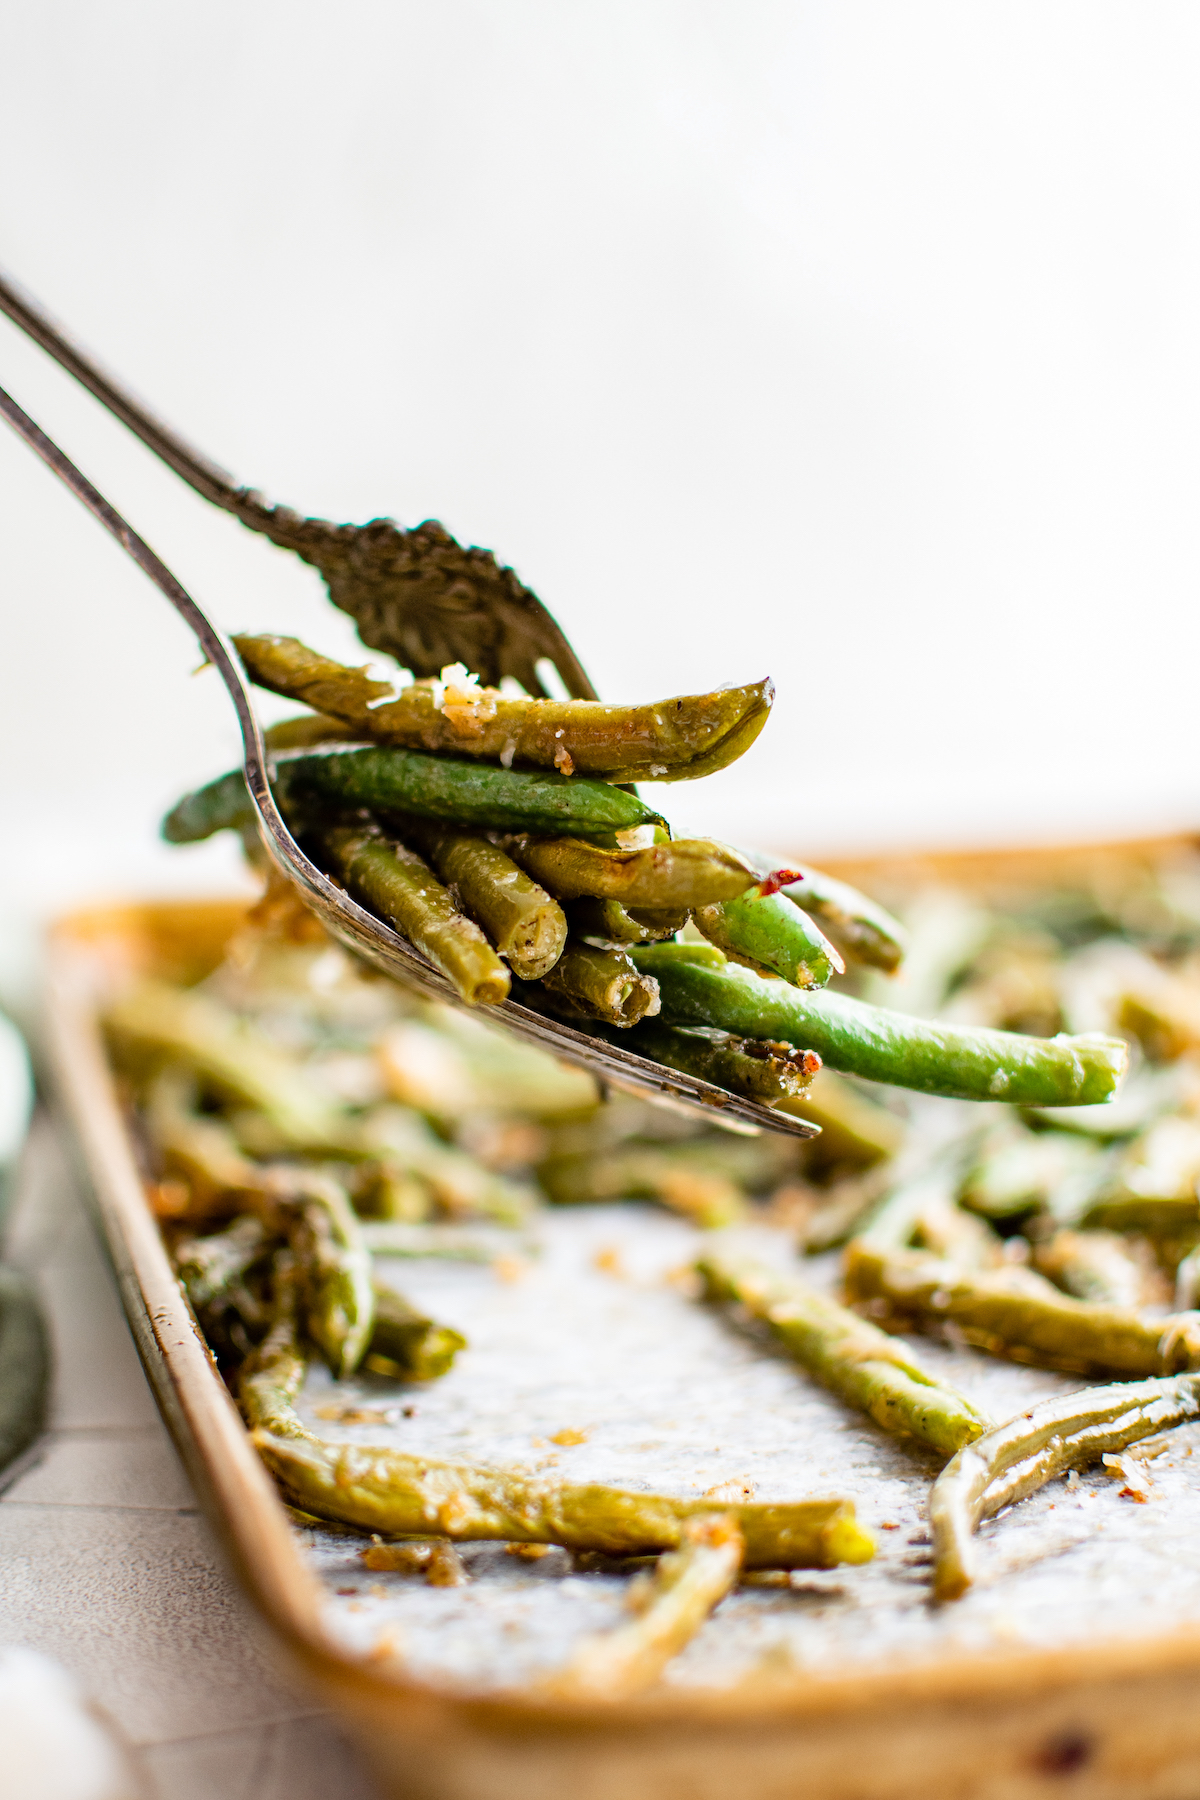 Green beans lifted from a sheet pan with two forks.